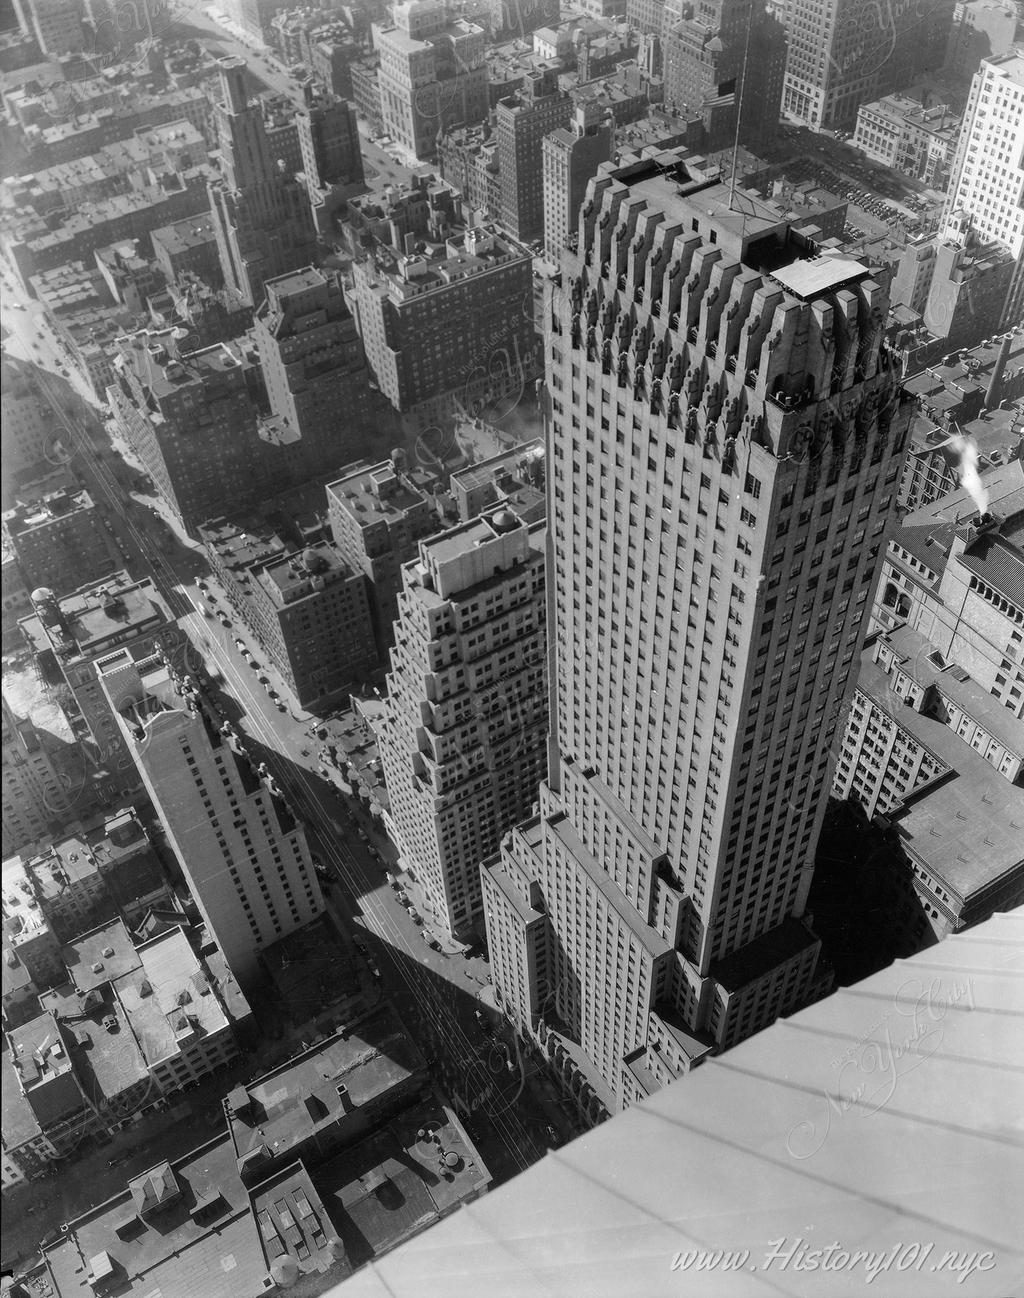 Photograph of the Chanin Building and midtown Manhattan from a bird's eye perspective, taken from the Chrysler Building.